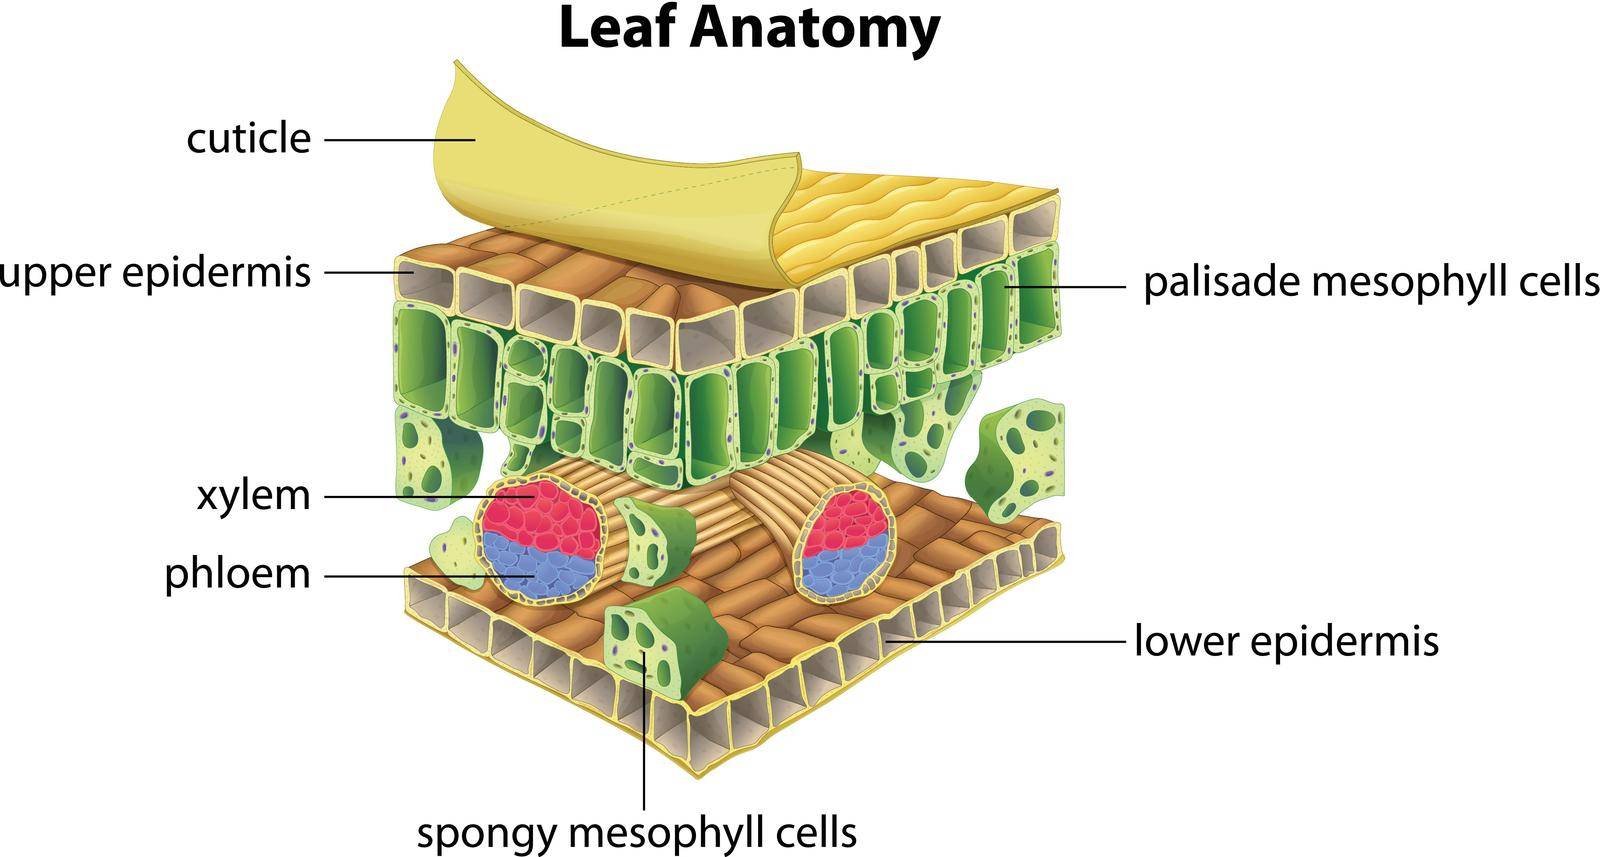 Illustration of the anatomy of a leaf